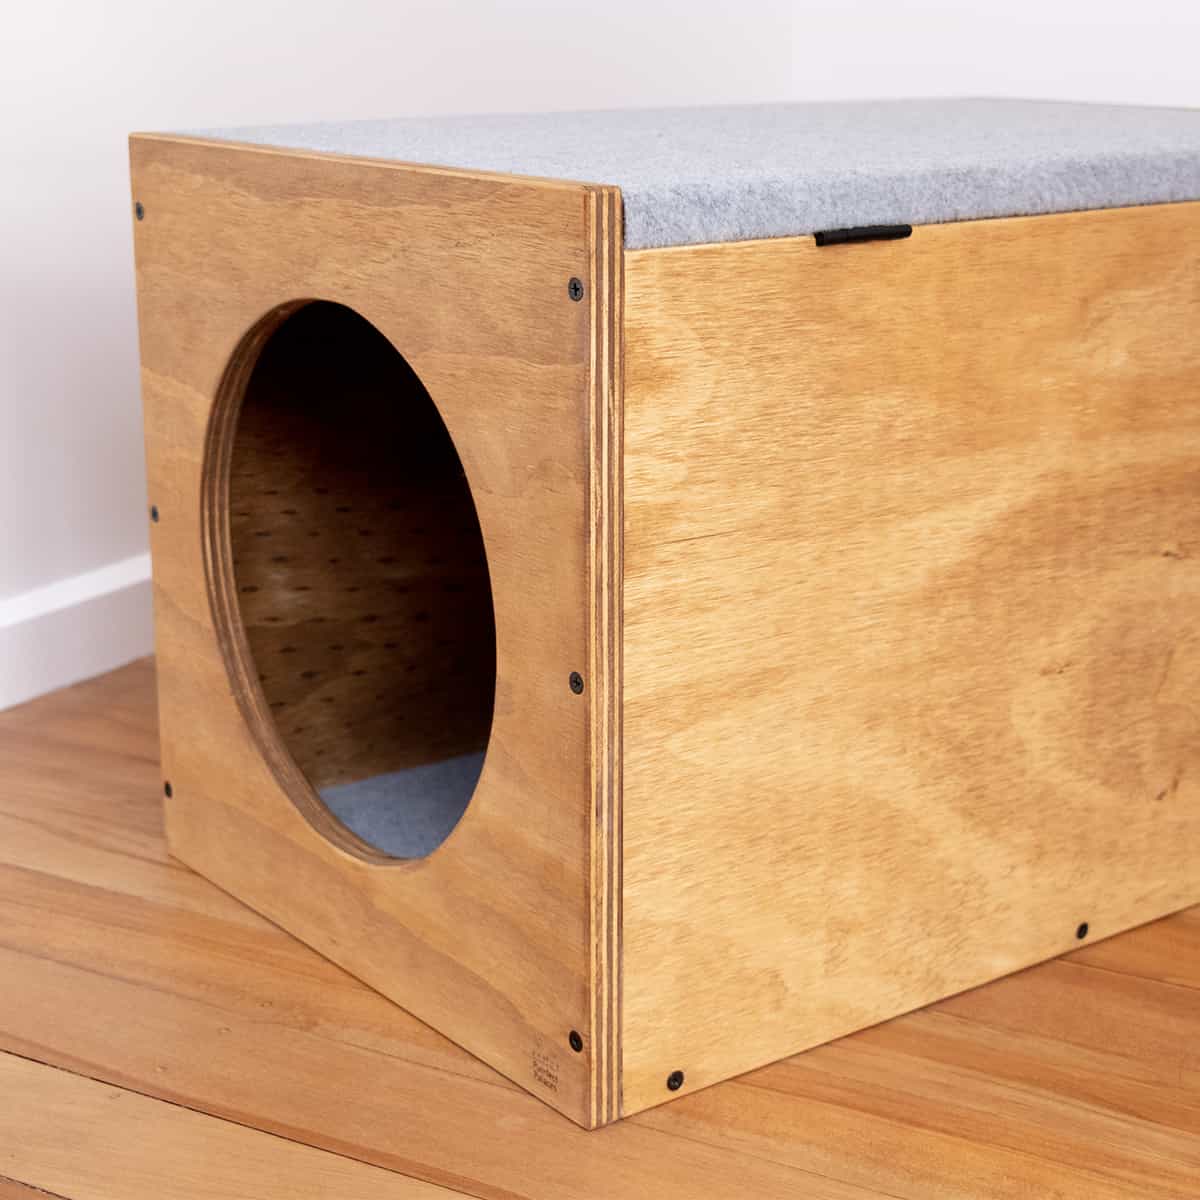 Cat box - back view showing hinge